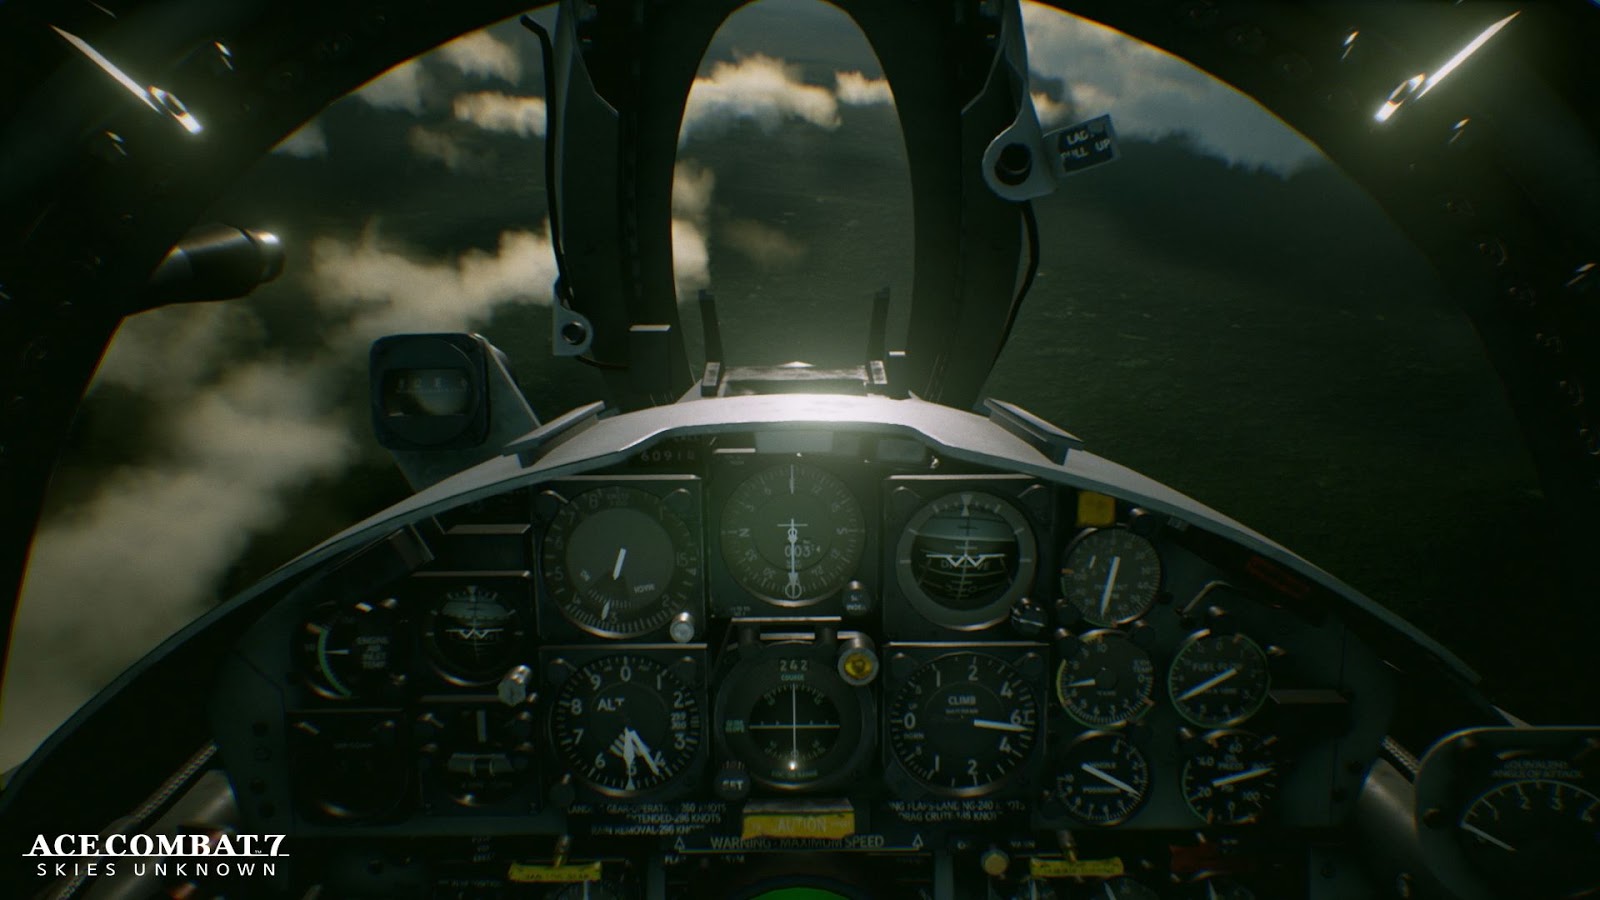 ACE COMBAT 7: SKIES UNKNOWN Trailer and Images | The Entertainment Factor1600 x 900